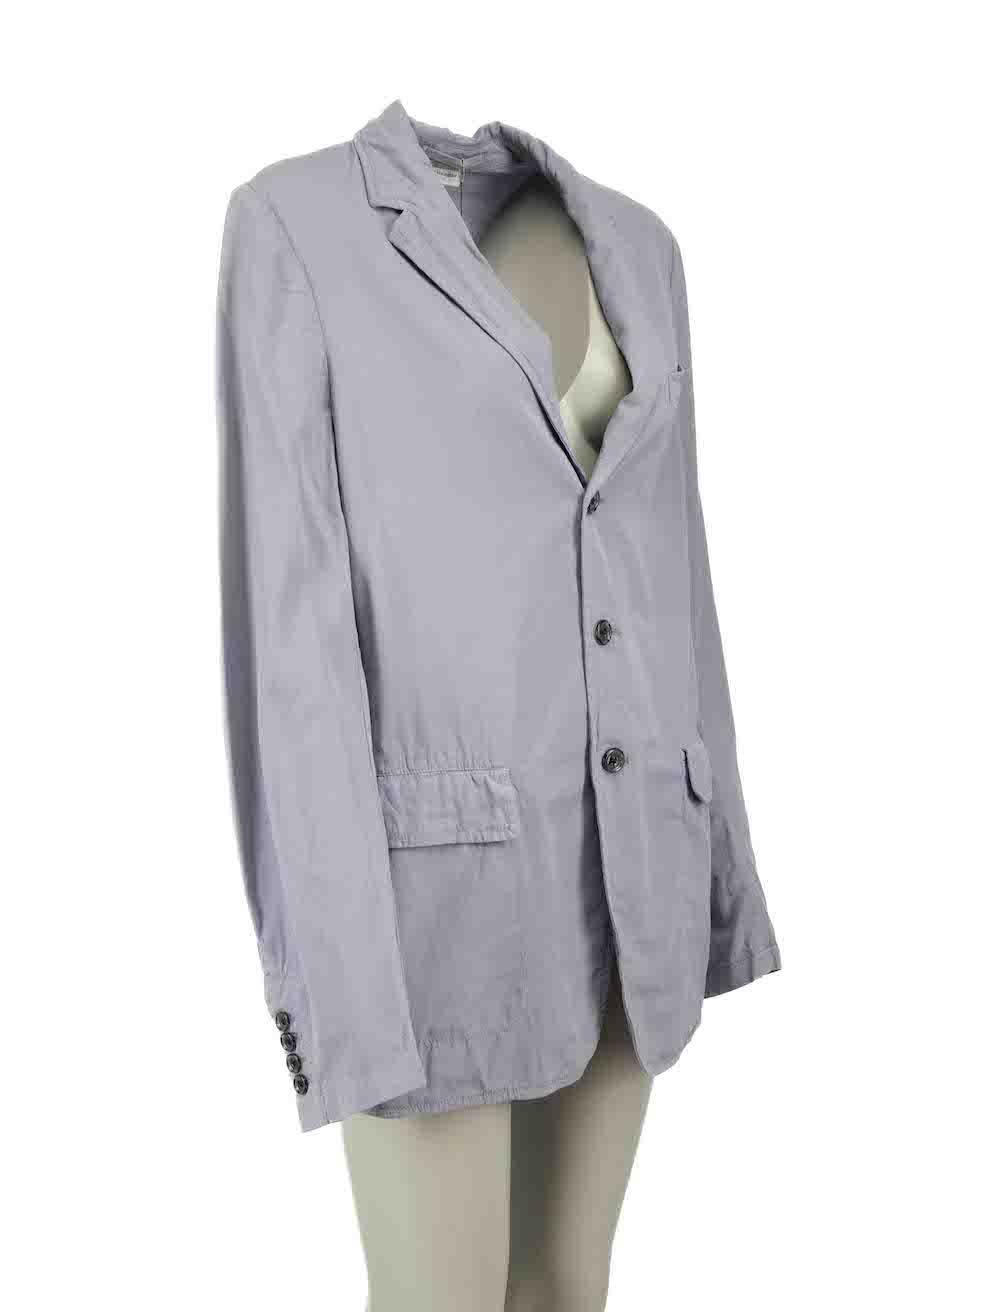 CONDITION is Never worn, with tags. No visible wear to jacket is evident on this new Dries Van Noten designer resale item.
 
 Details
 Purple
 Cotton
 Long sleeves blazer
 Front button closure
 2x Front side pockets with flaps
 Buttoned cuffs
